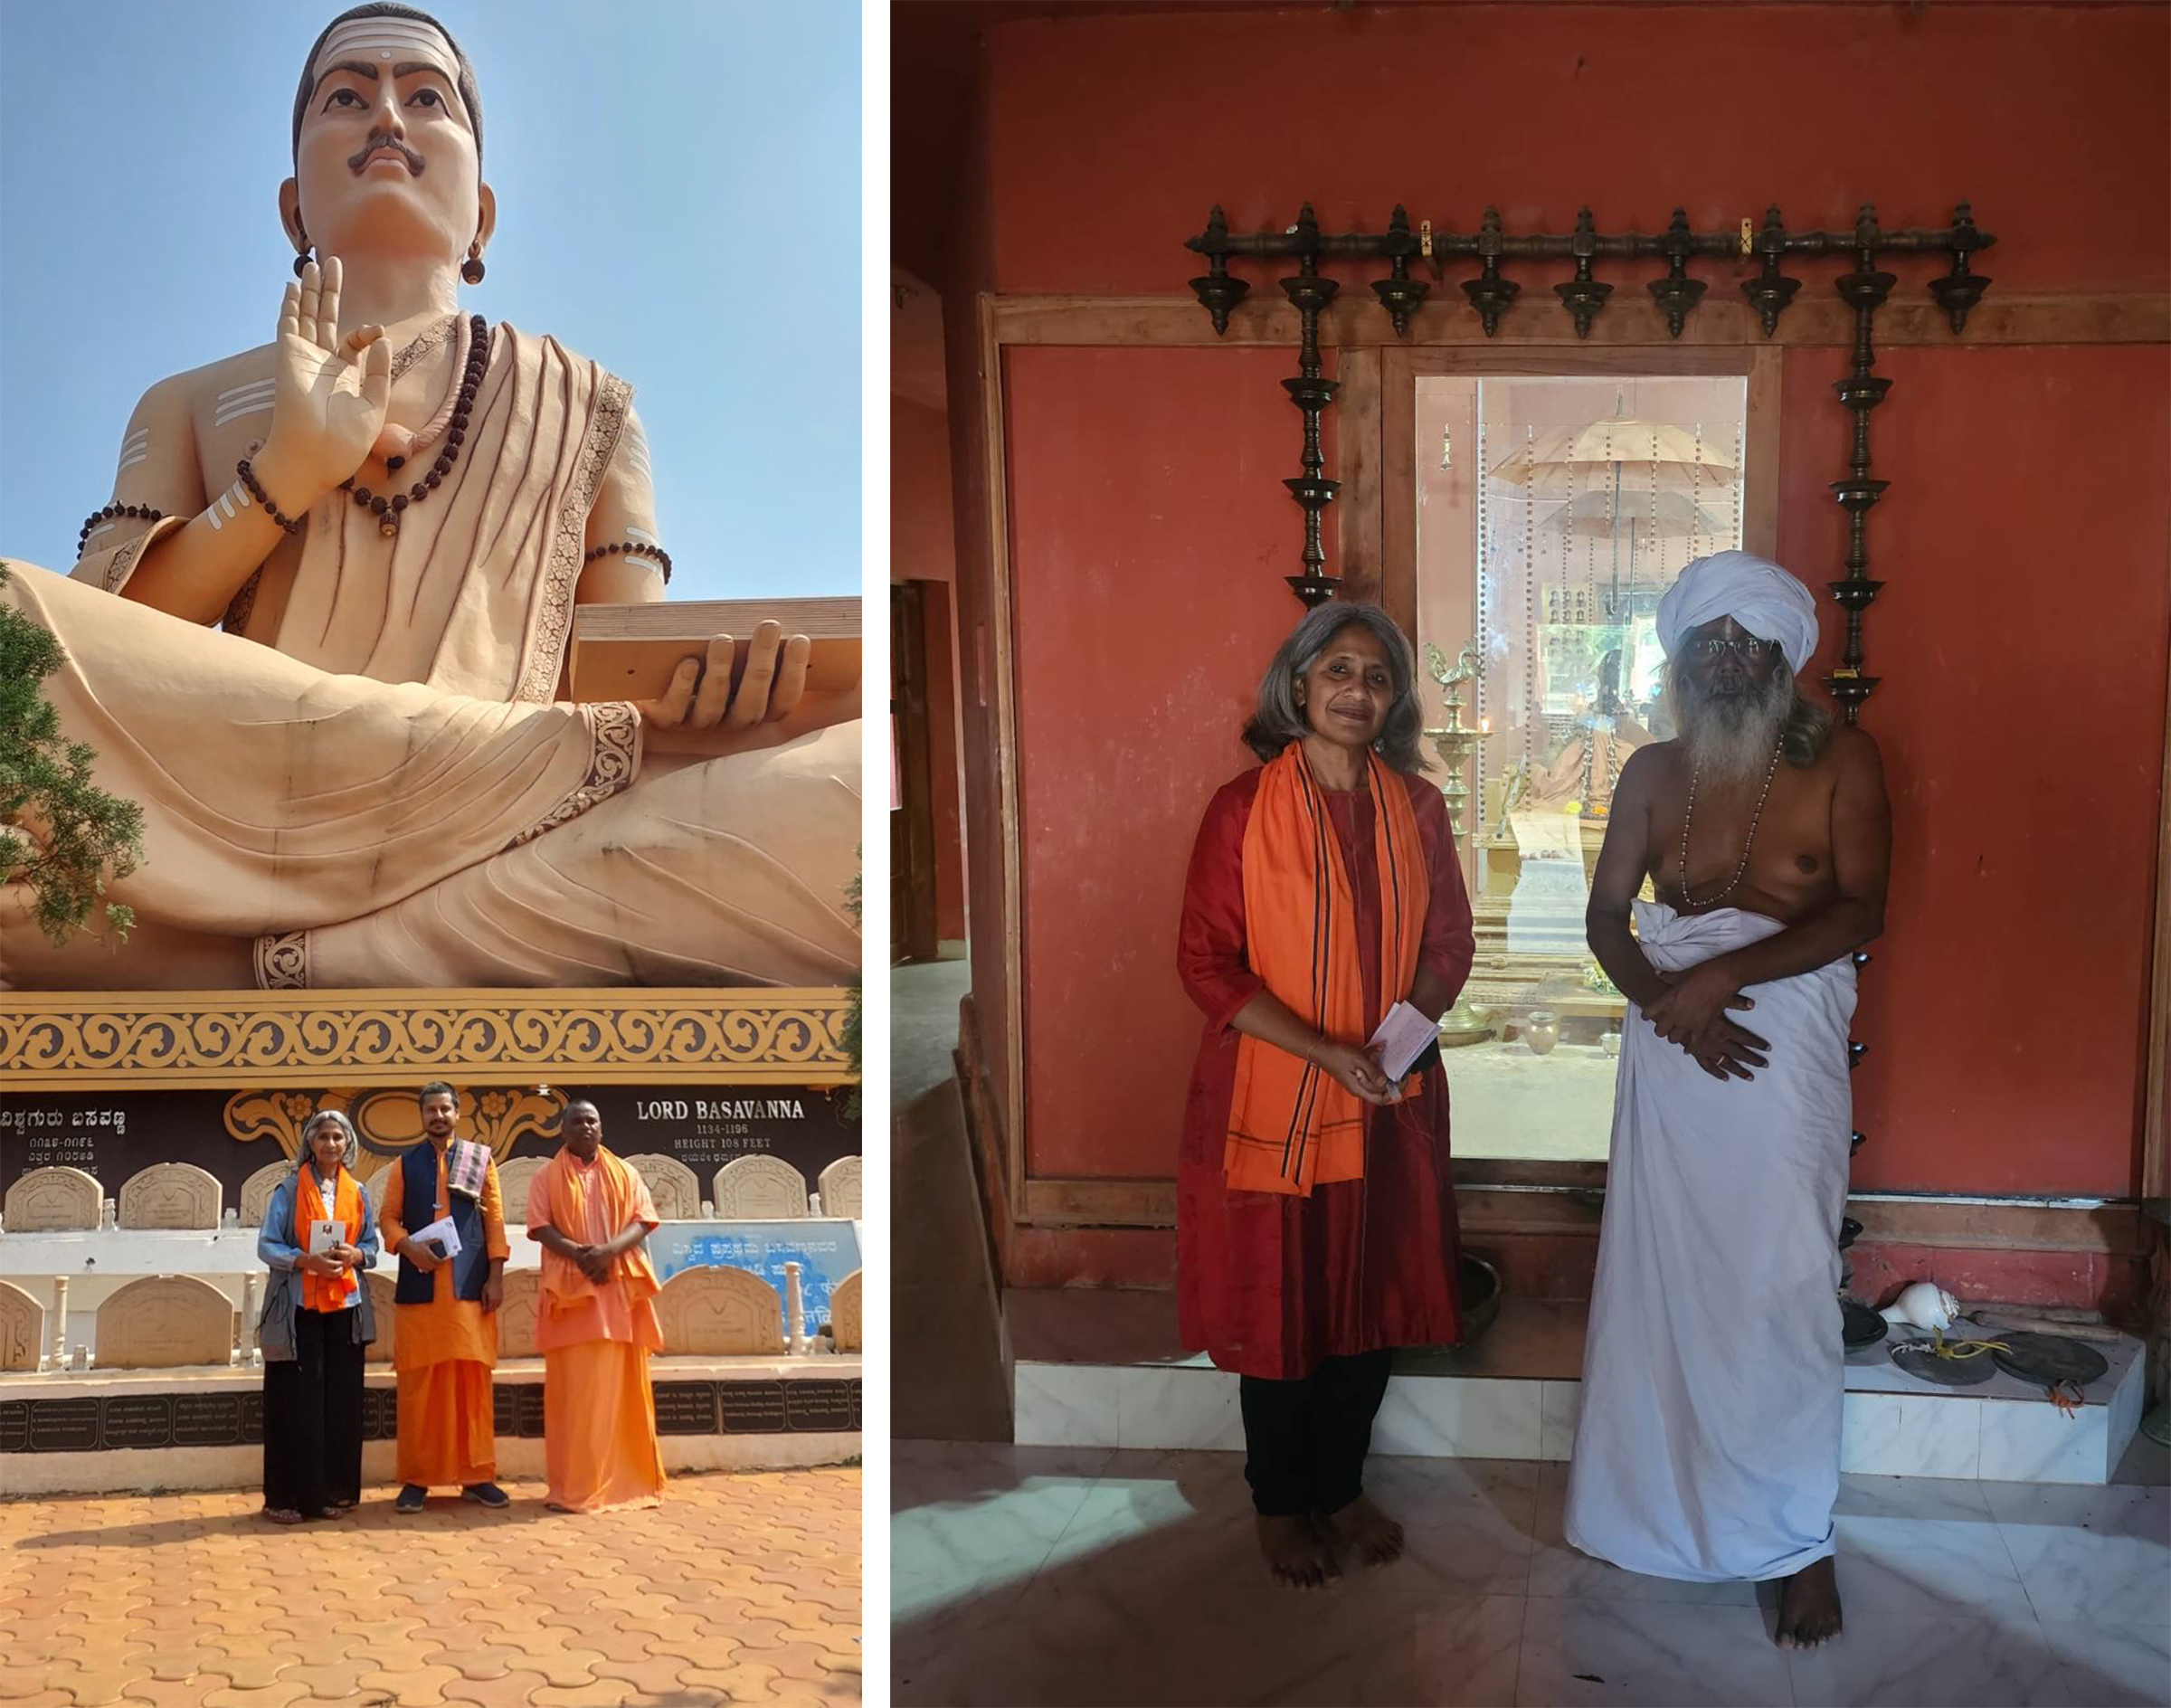 Left: The author, Swami Raghvendra, and Swami Korneshwar underneath a huge statue of Basavanna, in Basavakalyan, Karnataka, on Feb. 5; Right: The author with Bala Prajapati at a temple at Ayya Vazhi ashram, Kanyakumari, Tamil Nadu, on Feb. 10. At the temple, they have a mirror instead of a deity, "because the divine resides within each of us," says Bala Prajapati.